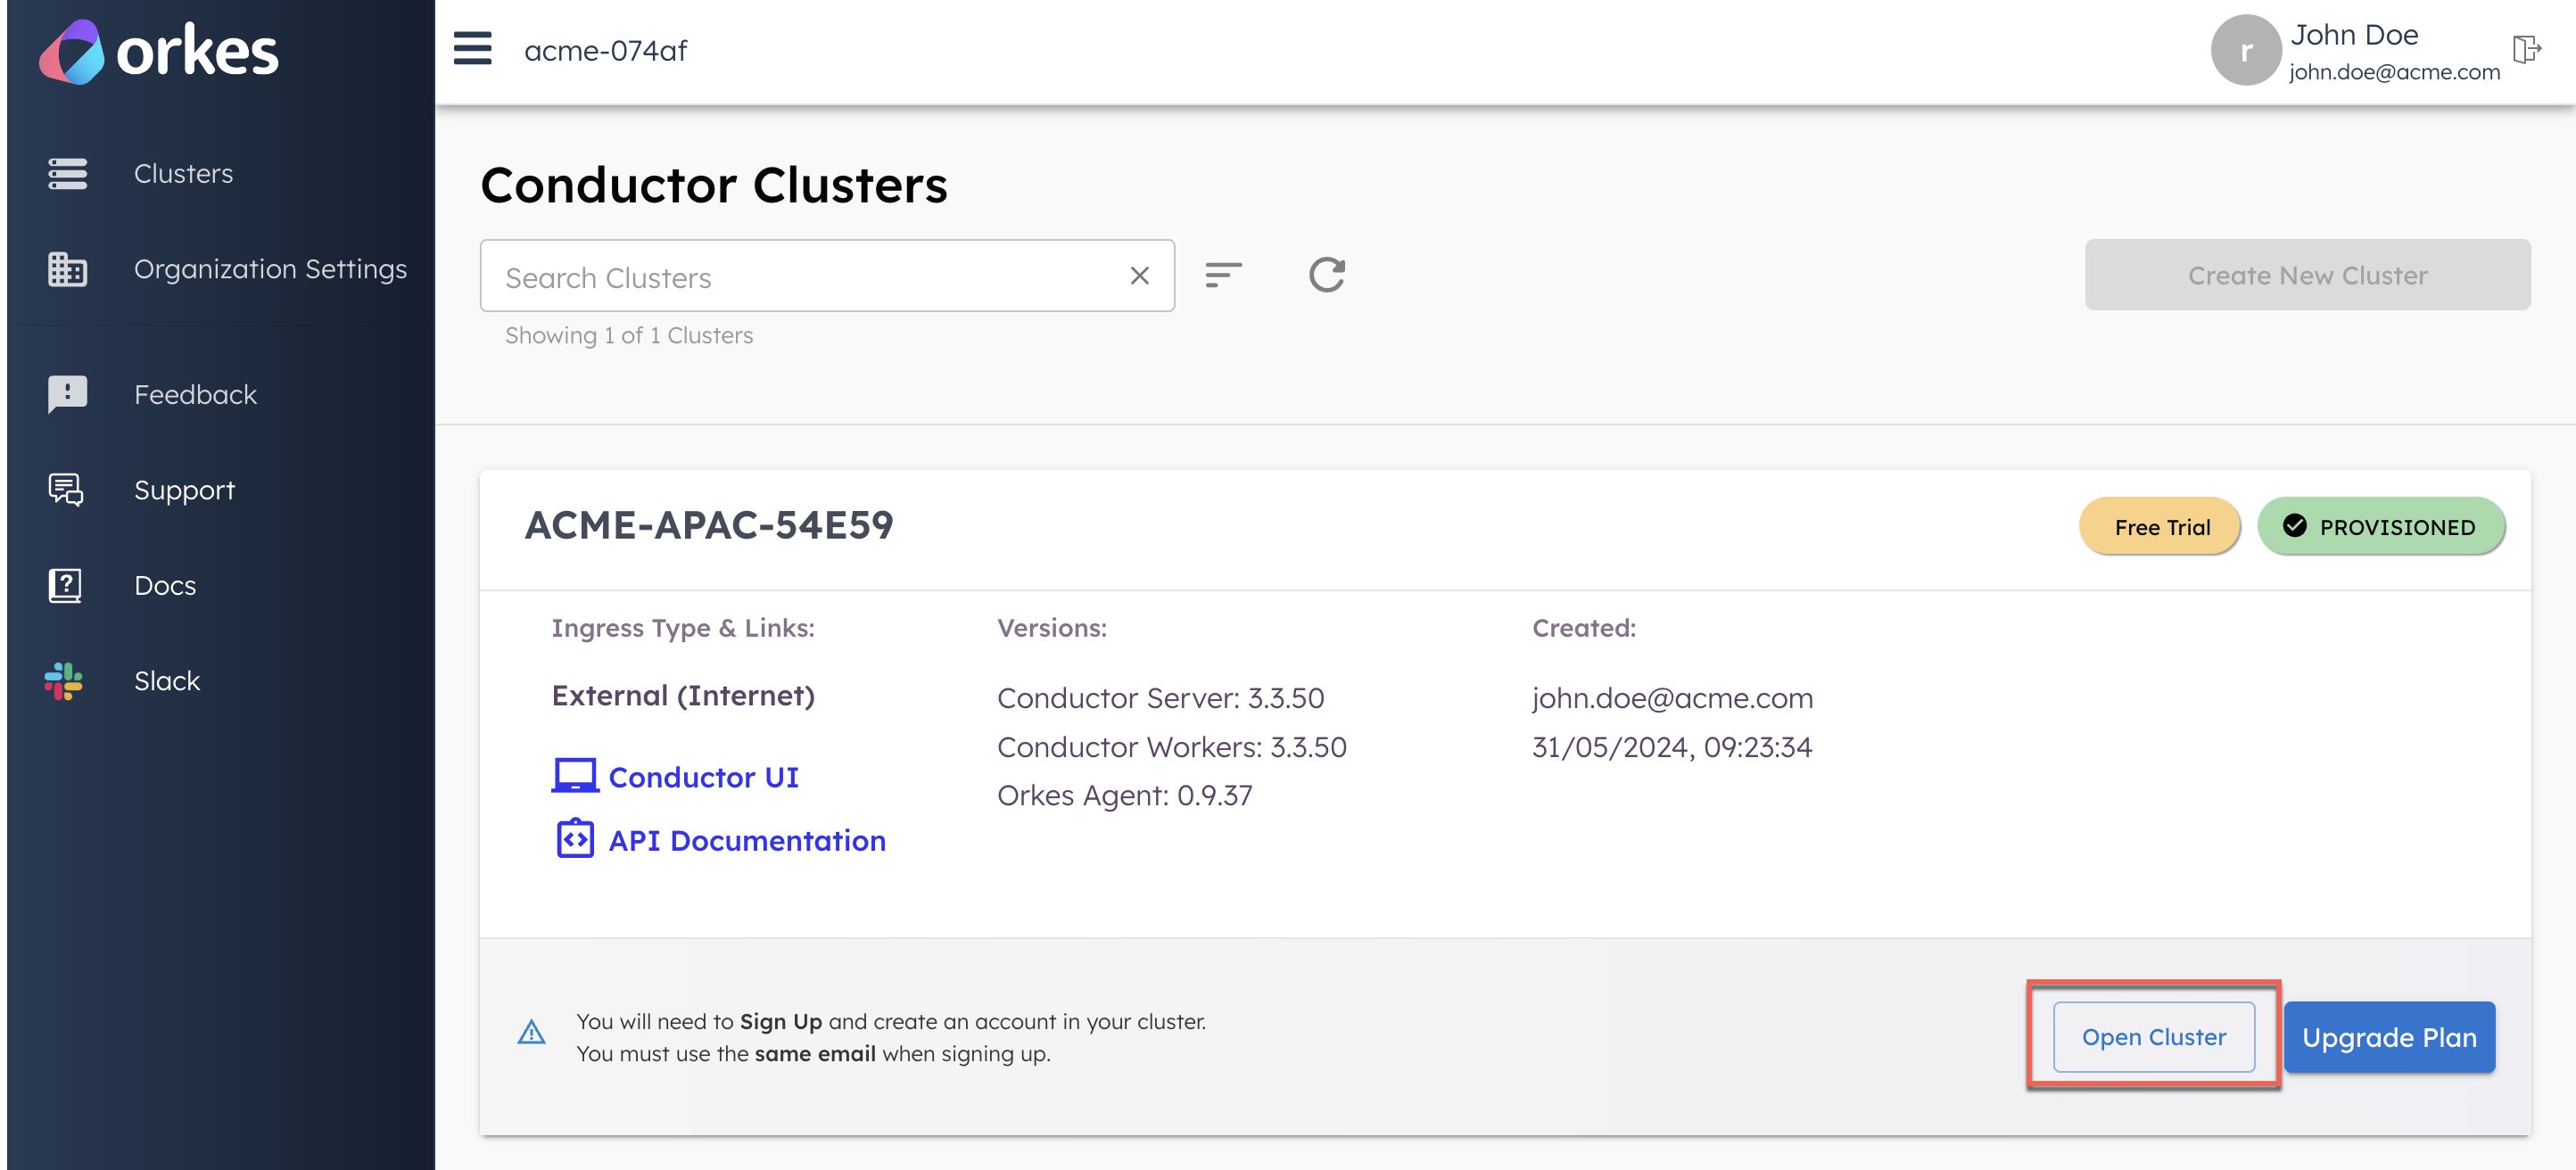 Open cluster option after provisioning